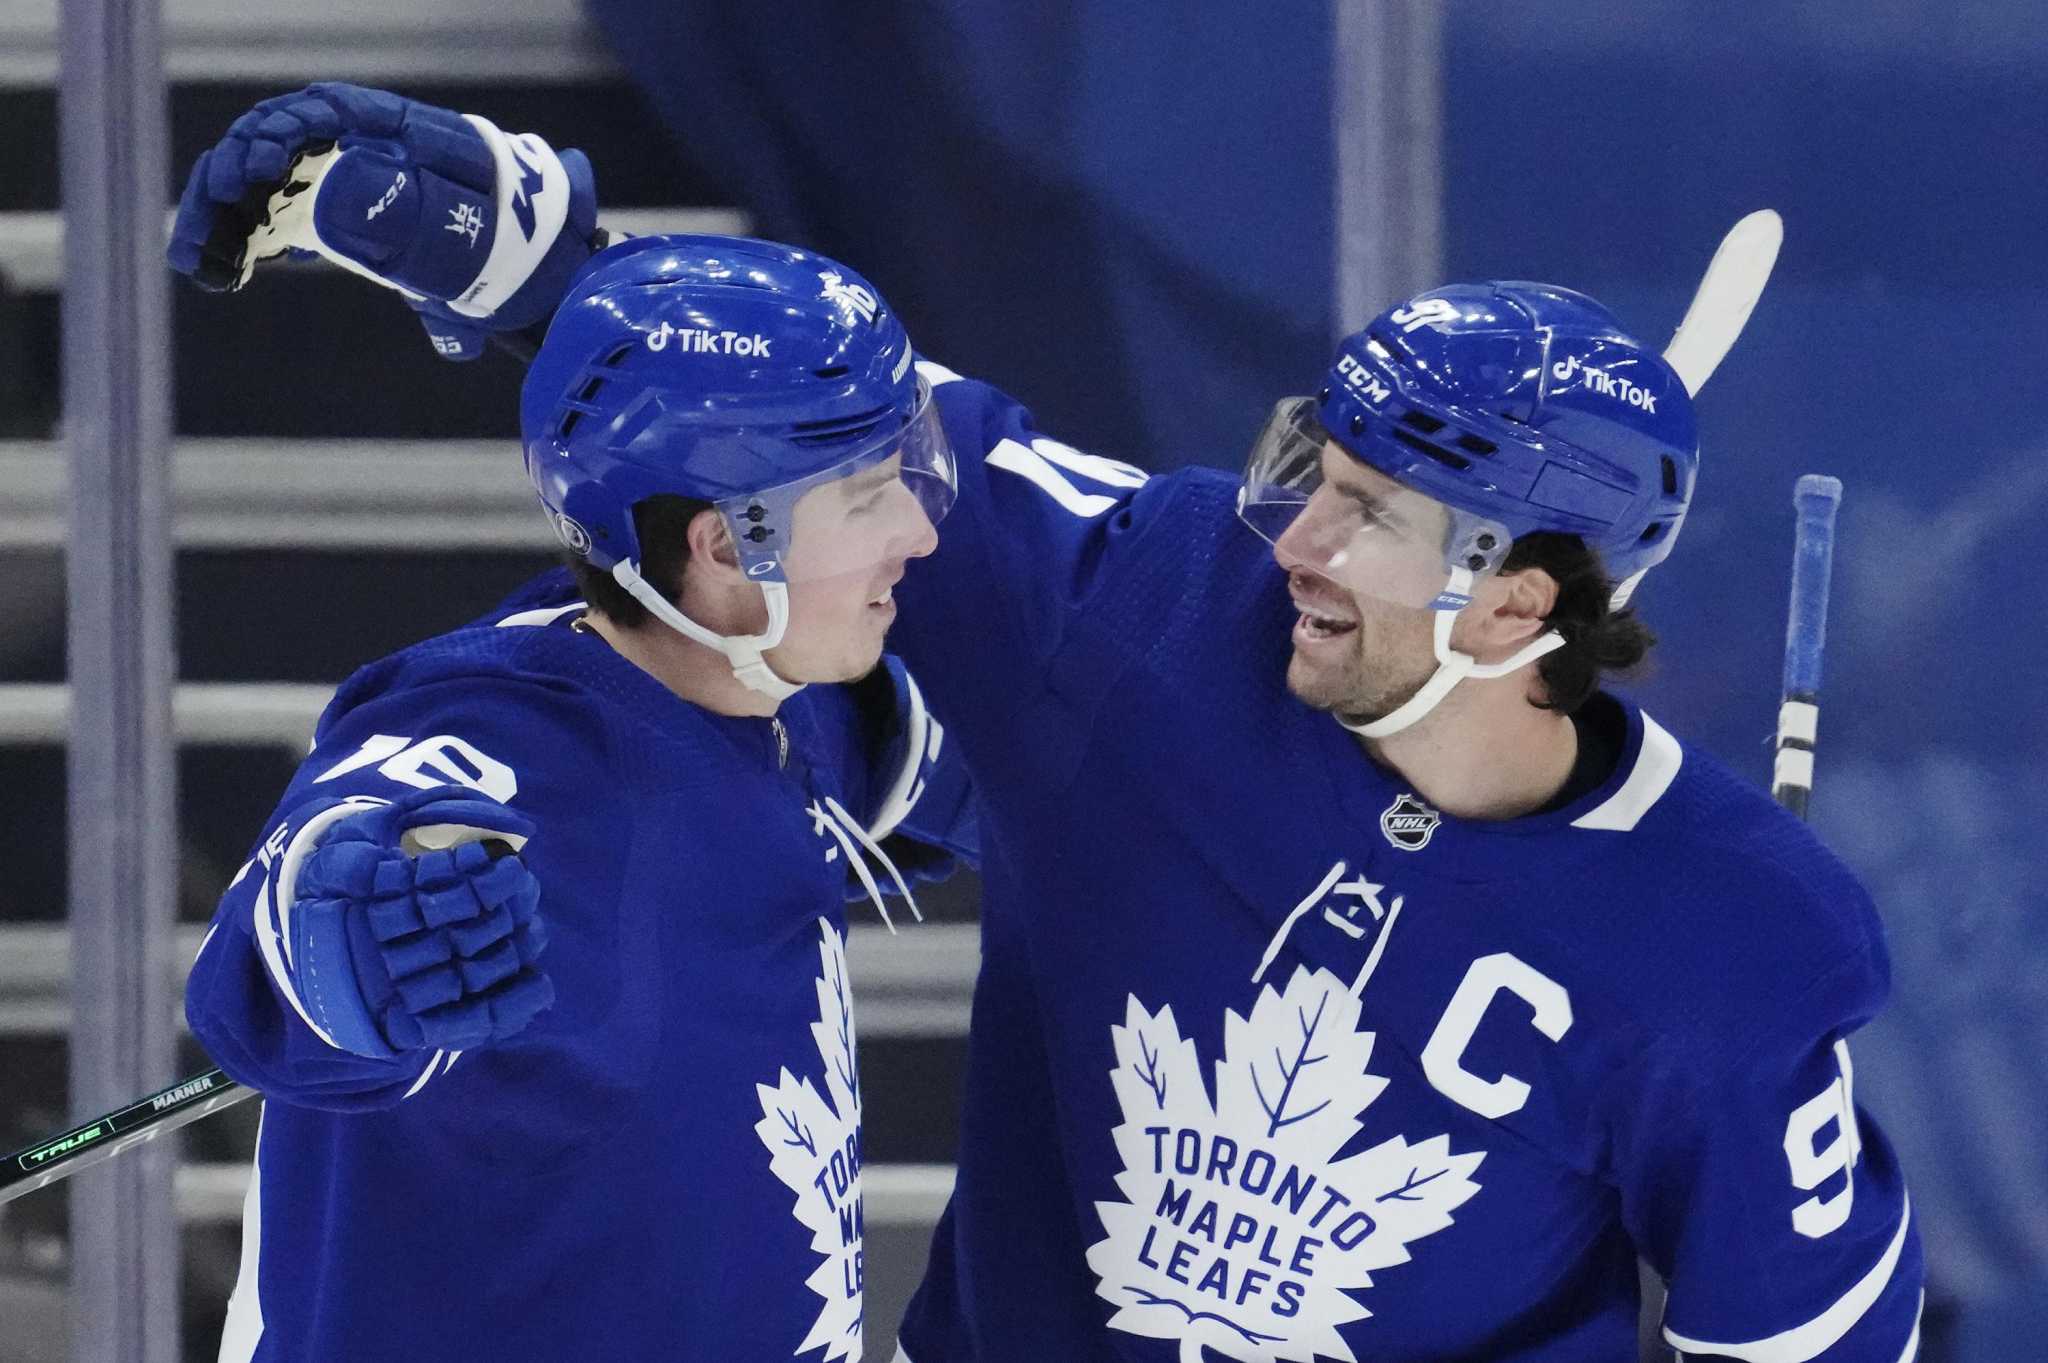 Leafs losing TikTok ad from helmets and adding new jersey patch